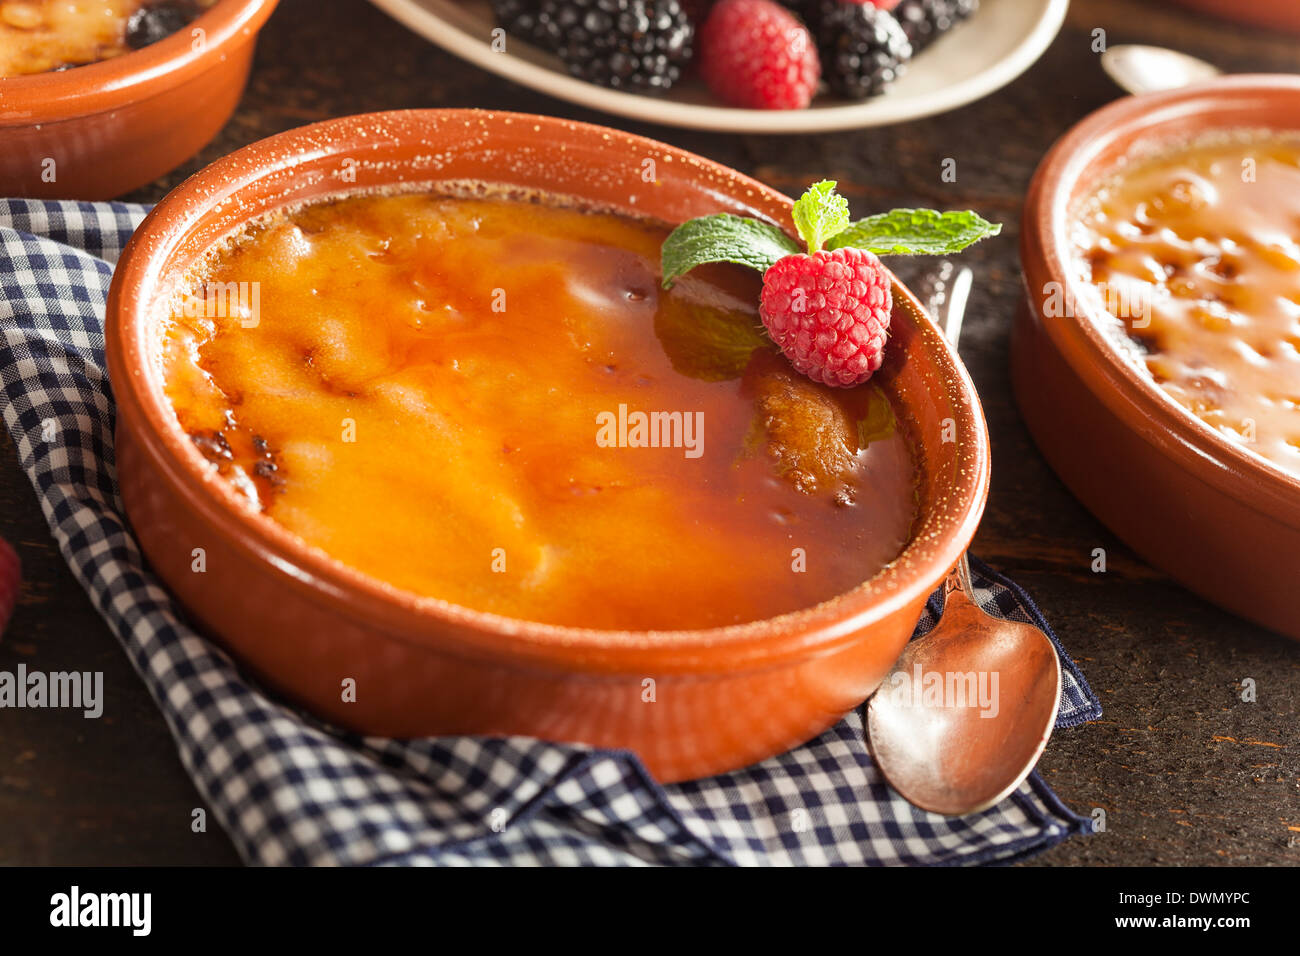 Gourmet Carmelized Creme Brulee with Berries and Mint Stock Photo